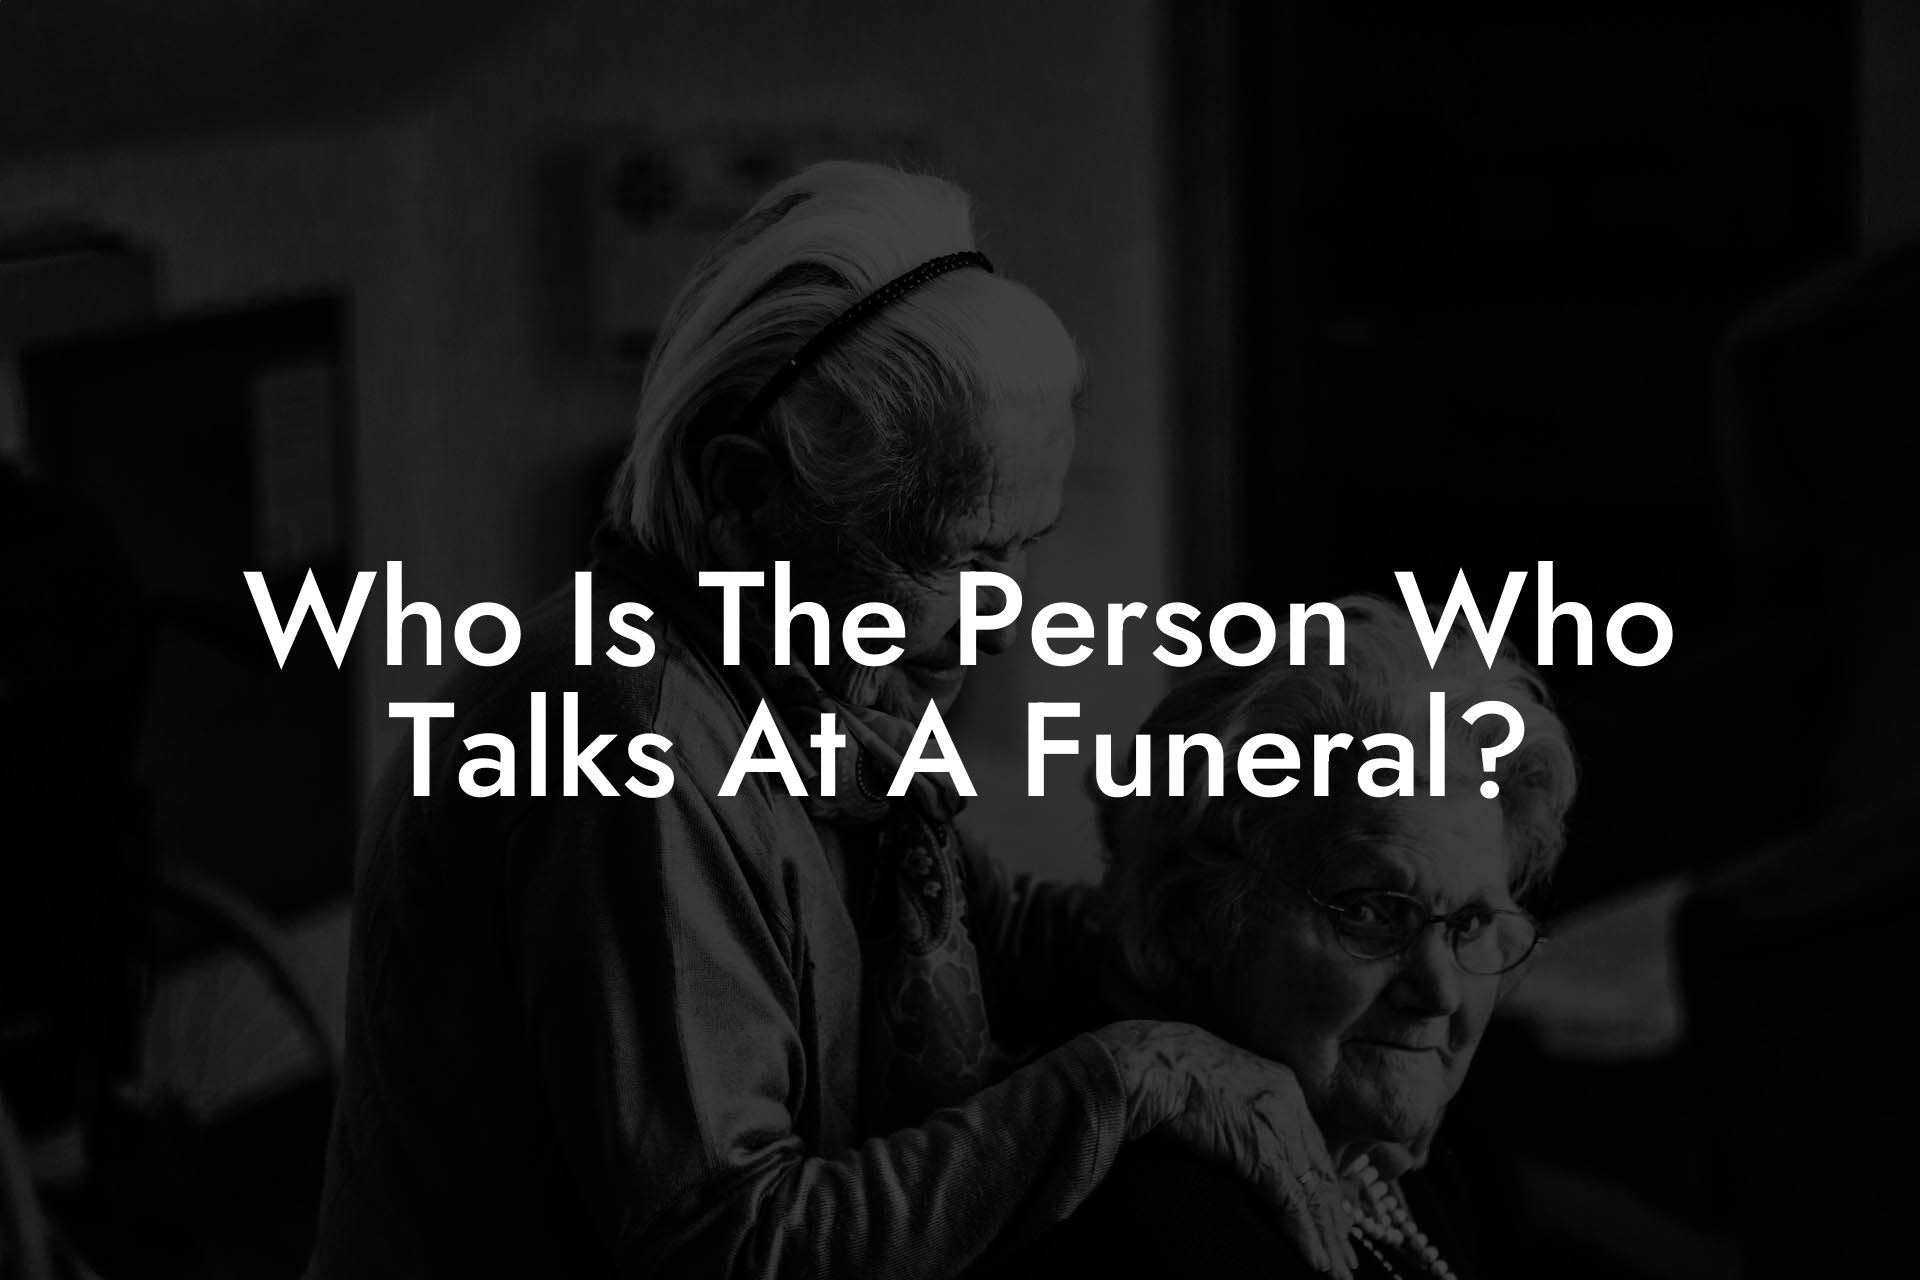 Who Is The Person Who Talks At A Funeral?